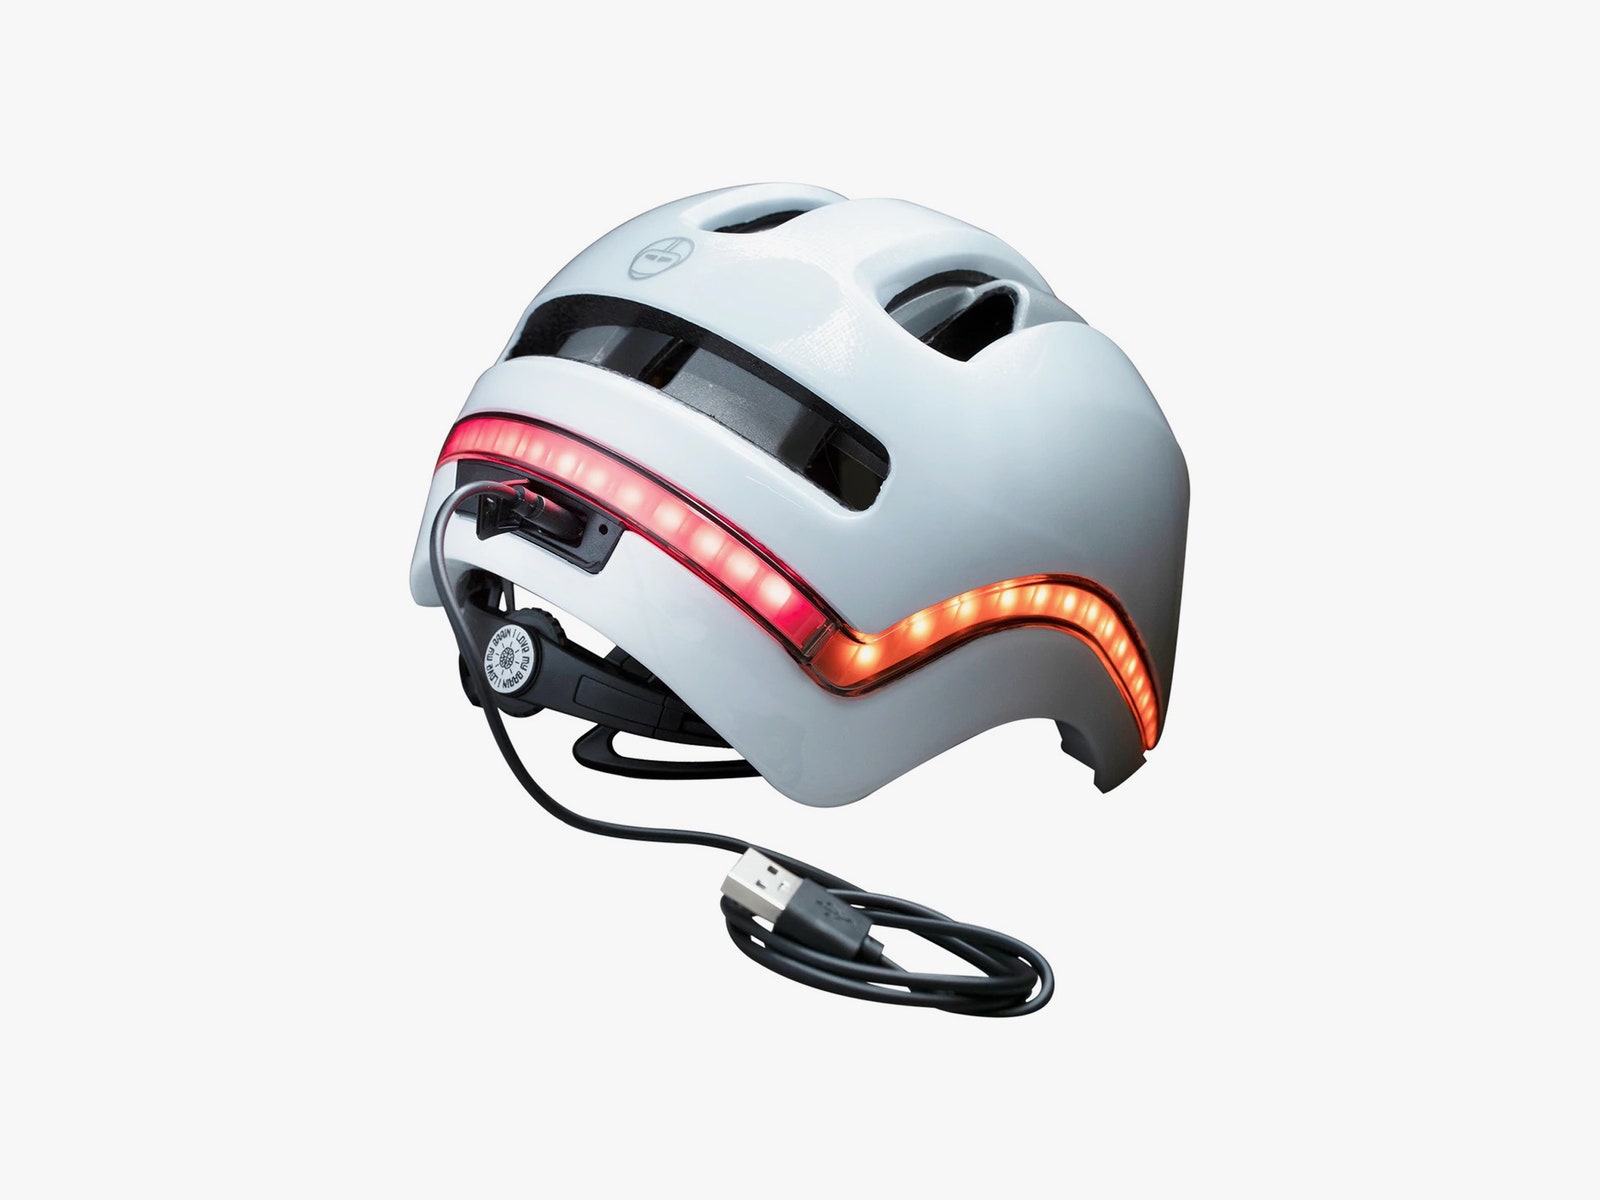 Nutcase Vio helmet with cable connected and lights on